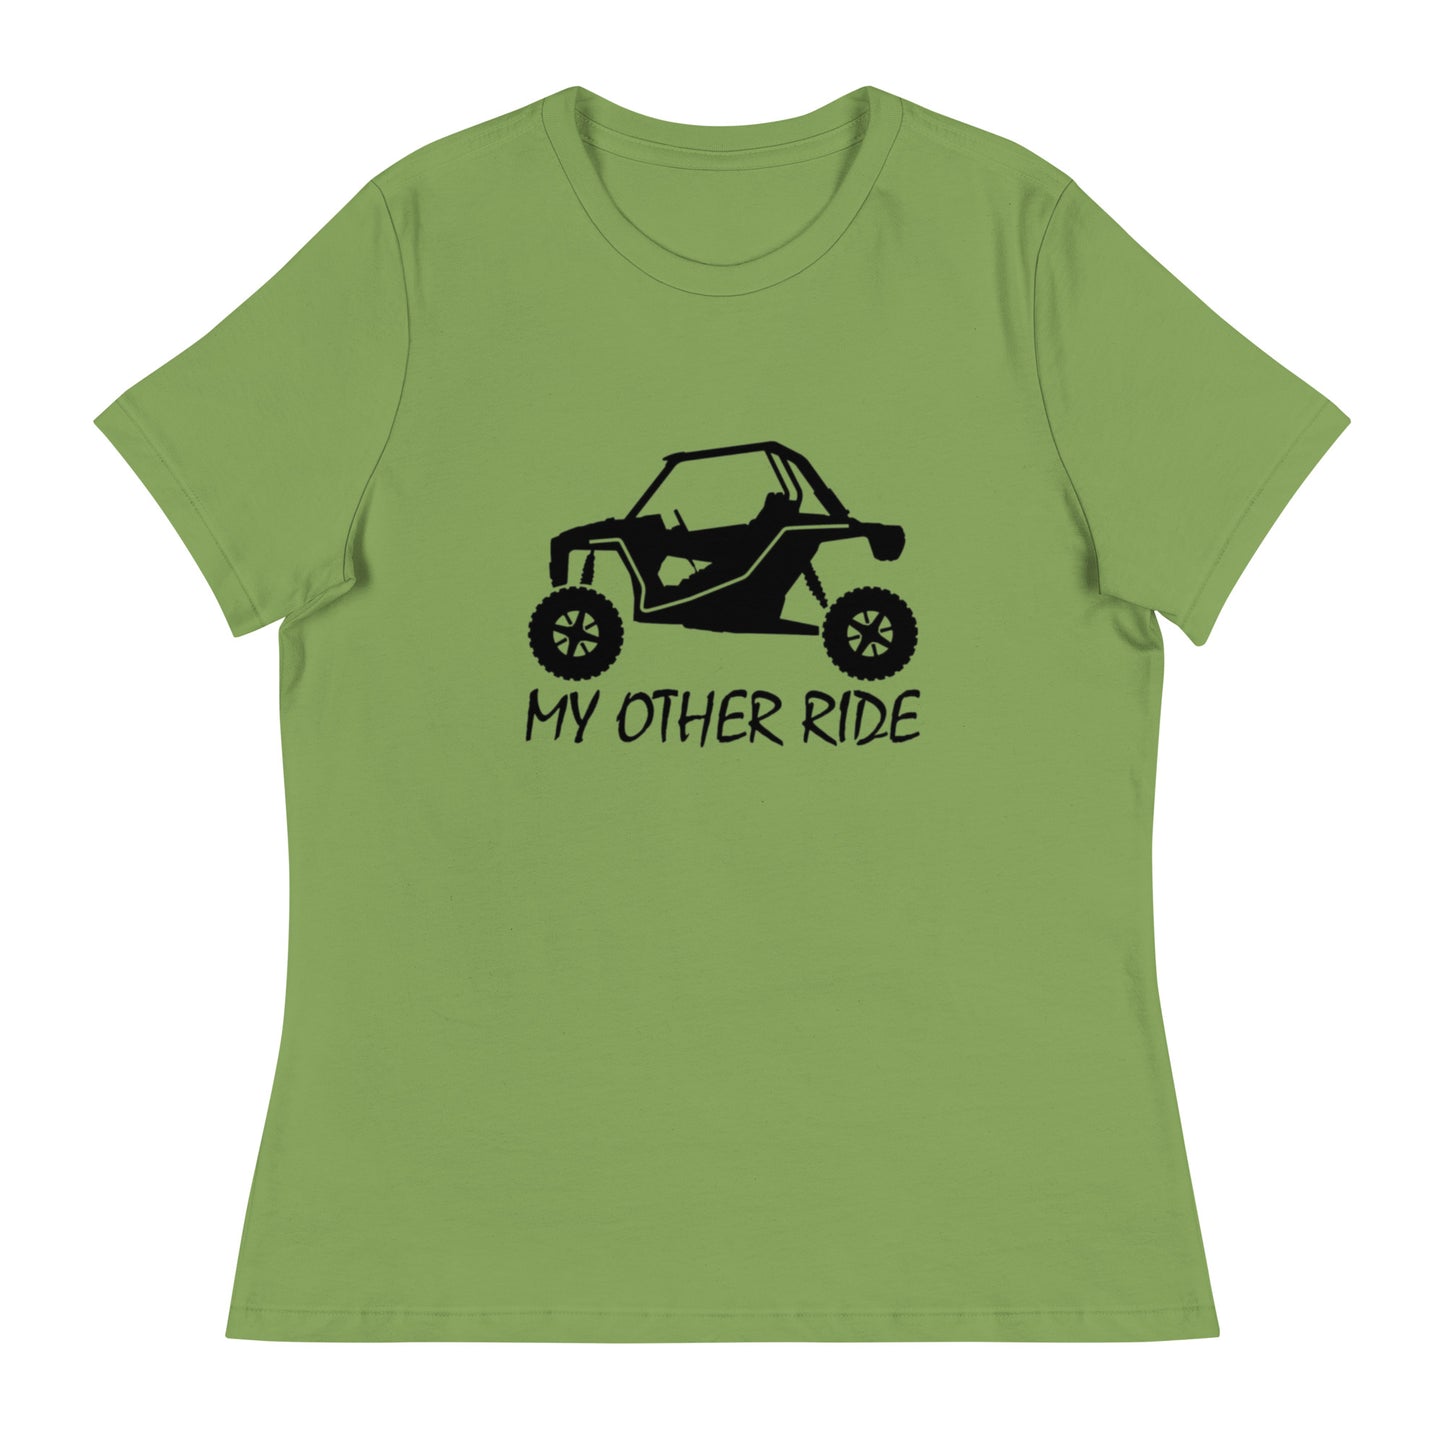 My Other Ride women's tee